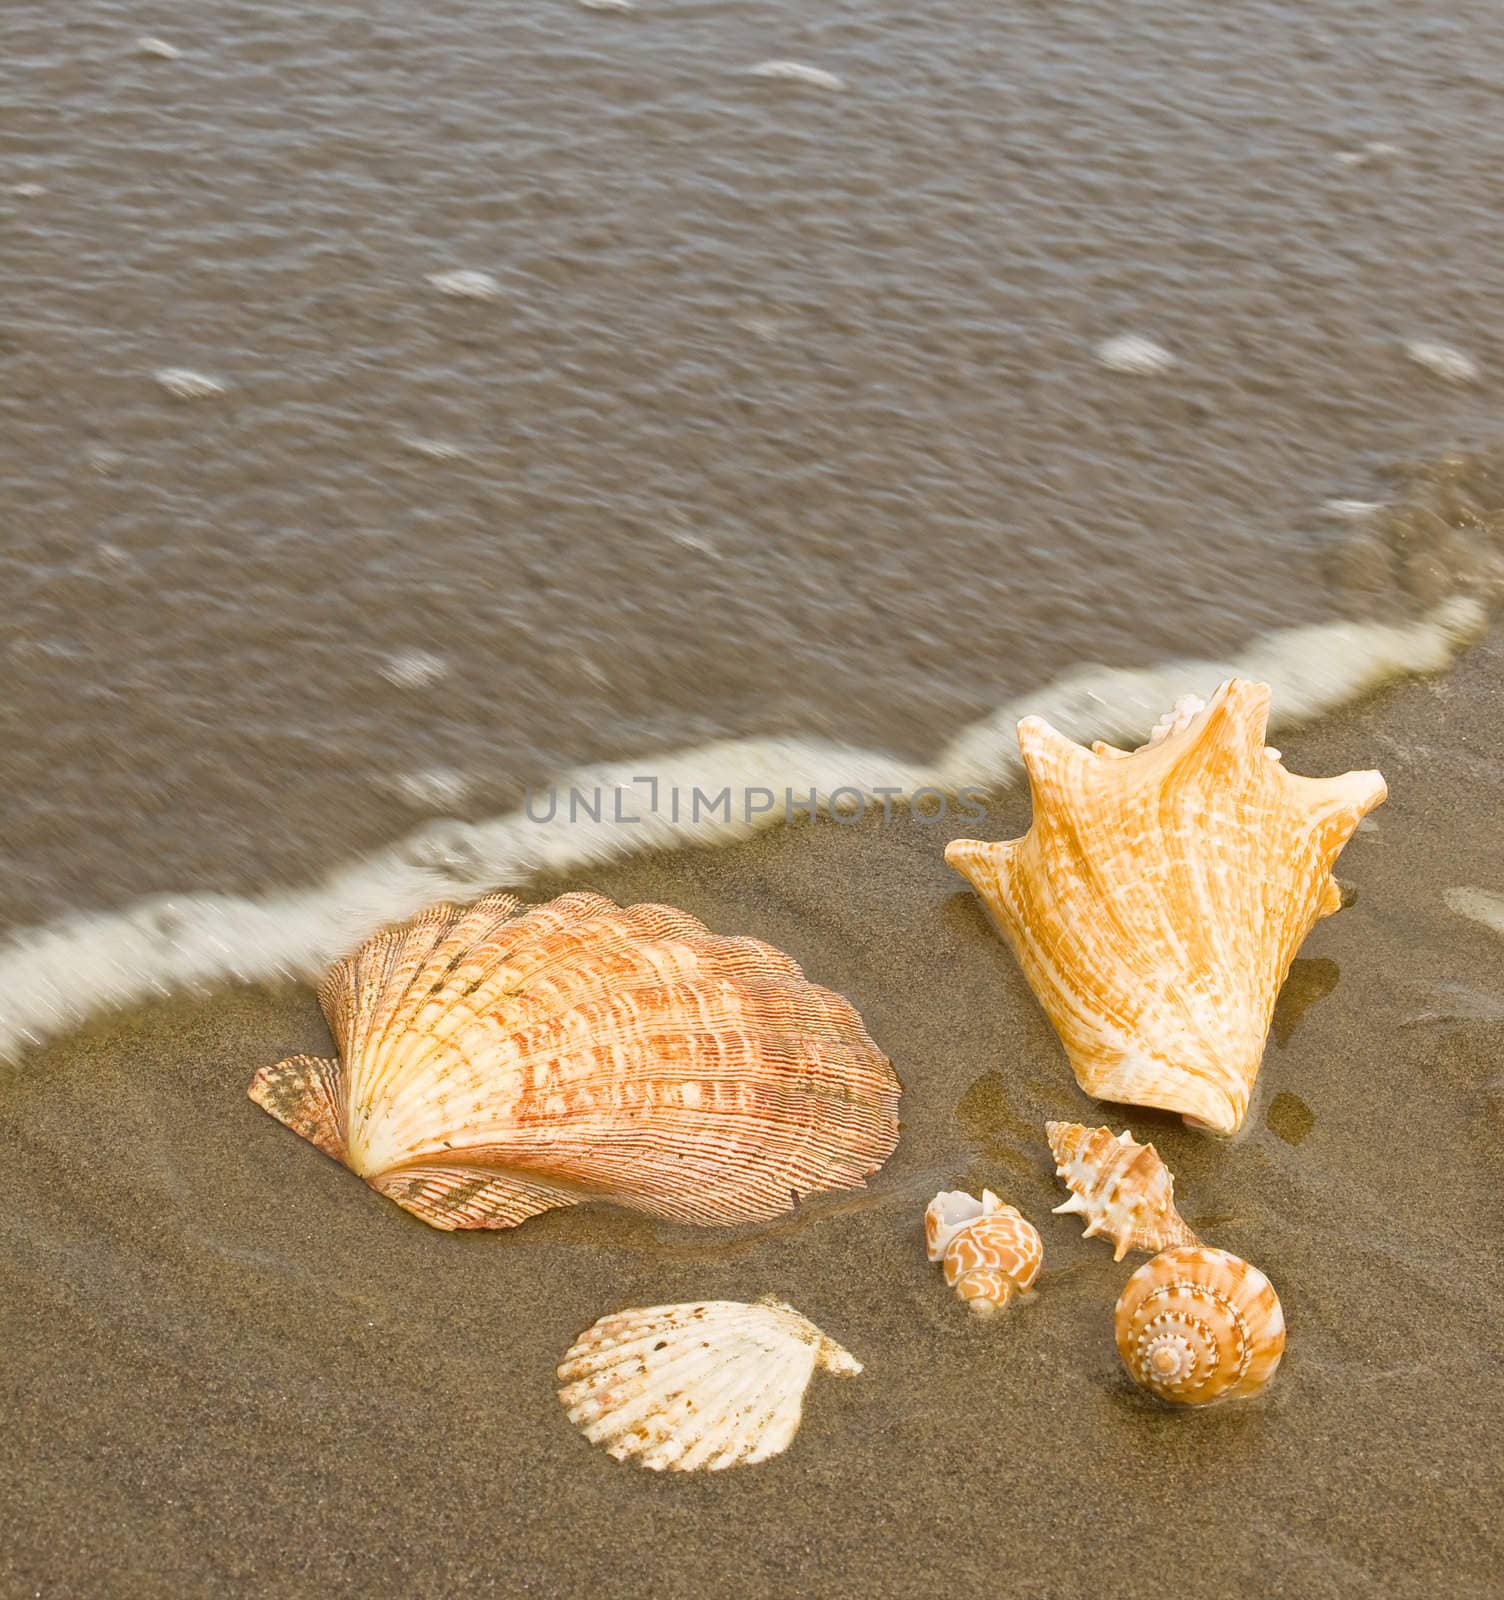 Scallop and Conch Shells on a Wet Sandy Beach as an Ocean Ripple Approaches